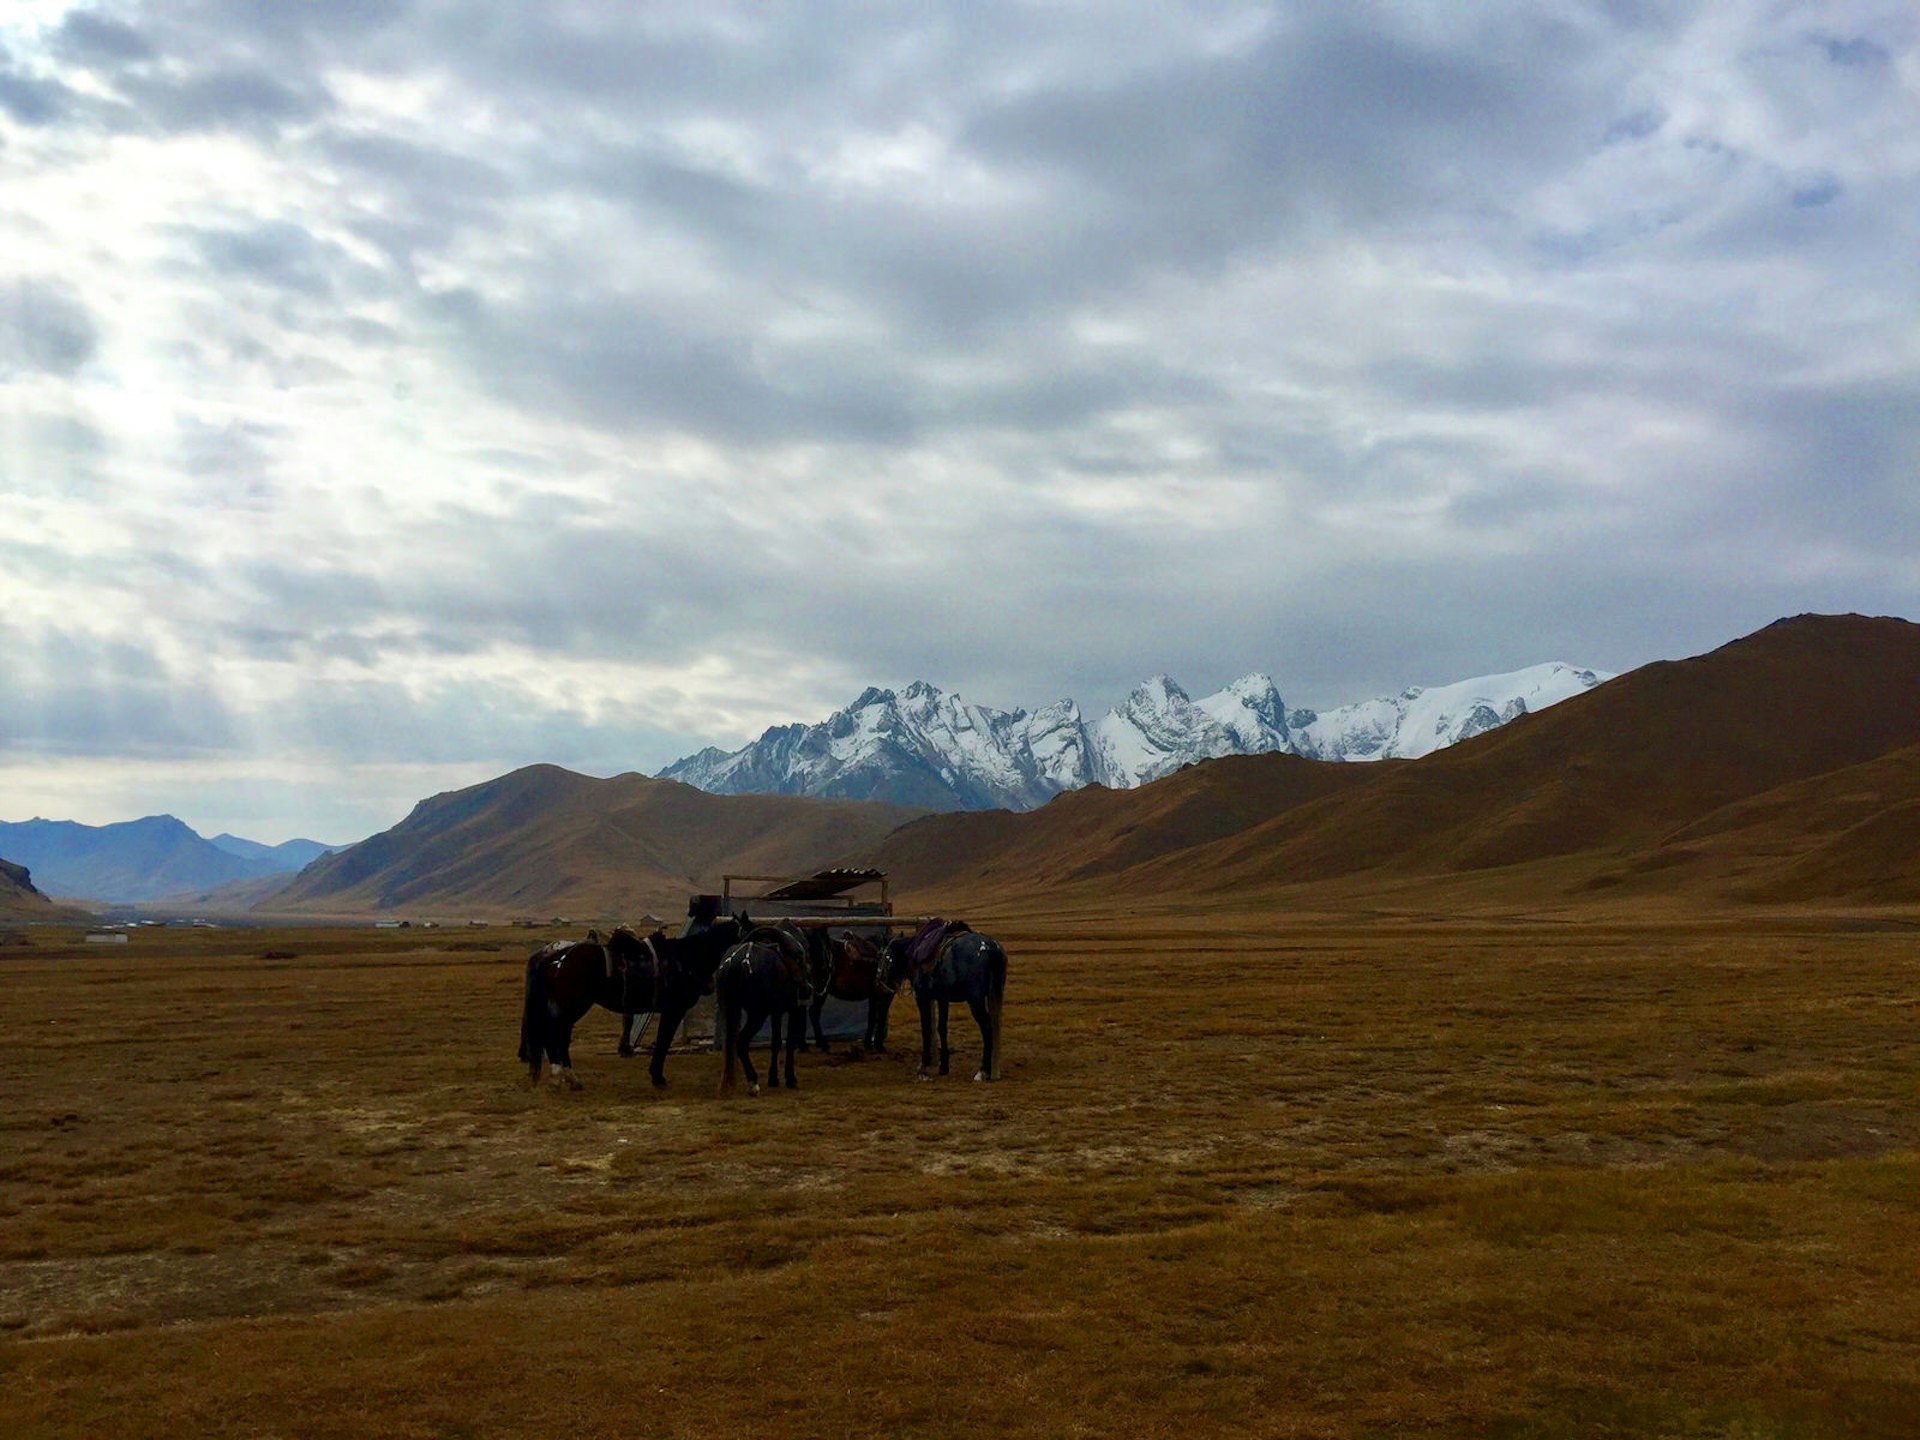 Five horses huddled around a small hitching post in an open valley with mountains in the background © Lonely Planet / Megan Eaves